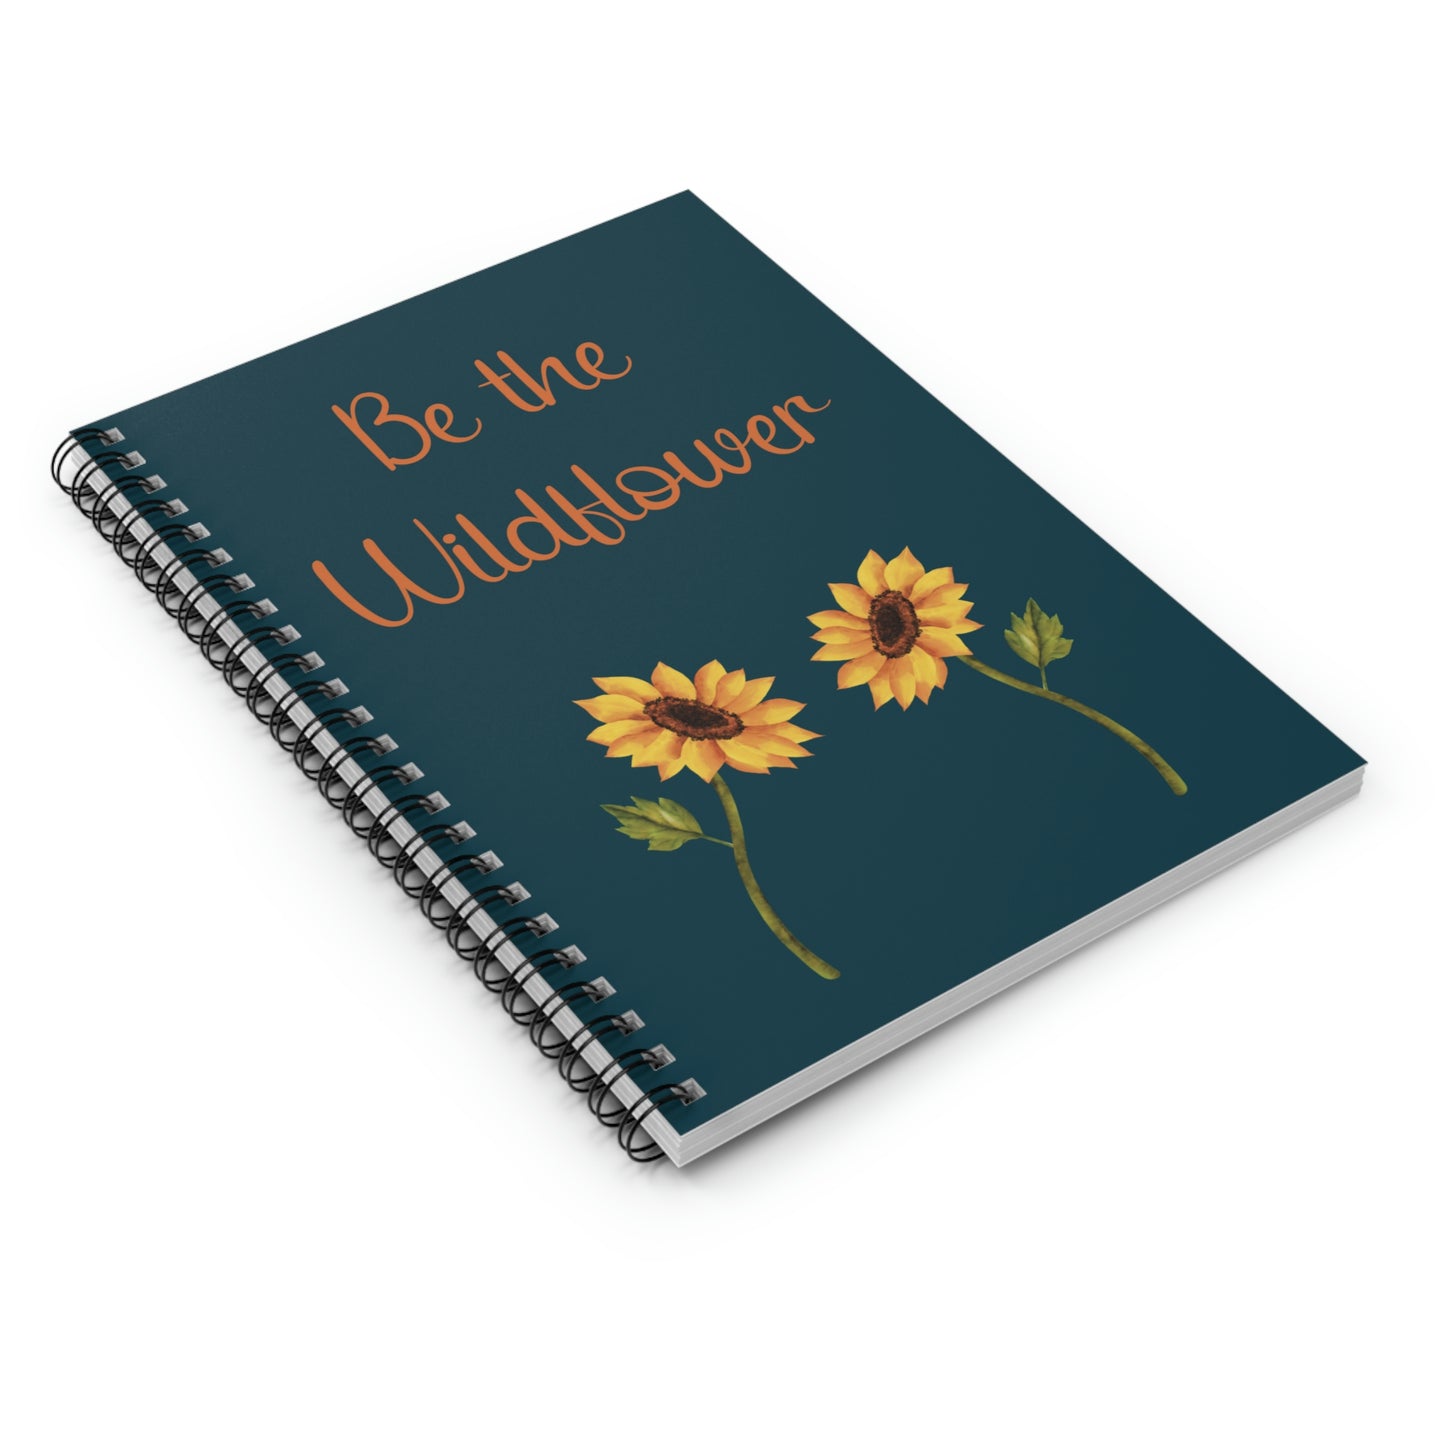 Be The Wildflower Spiral Notebook